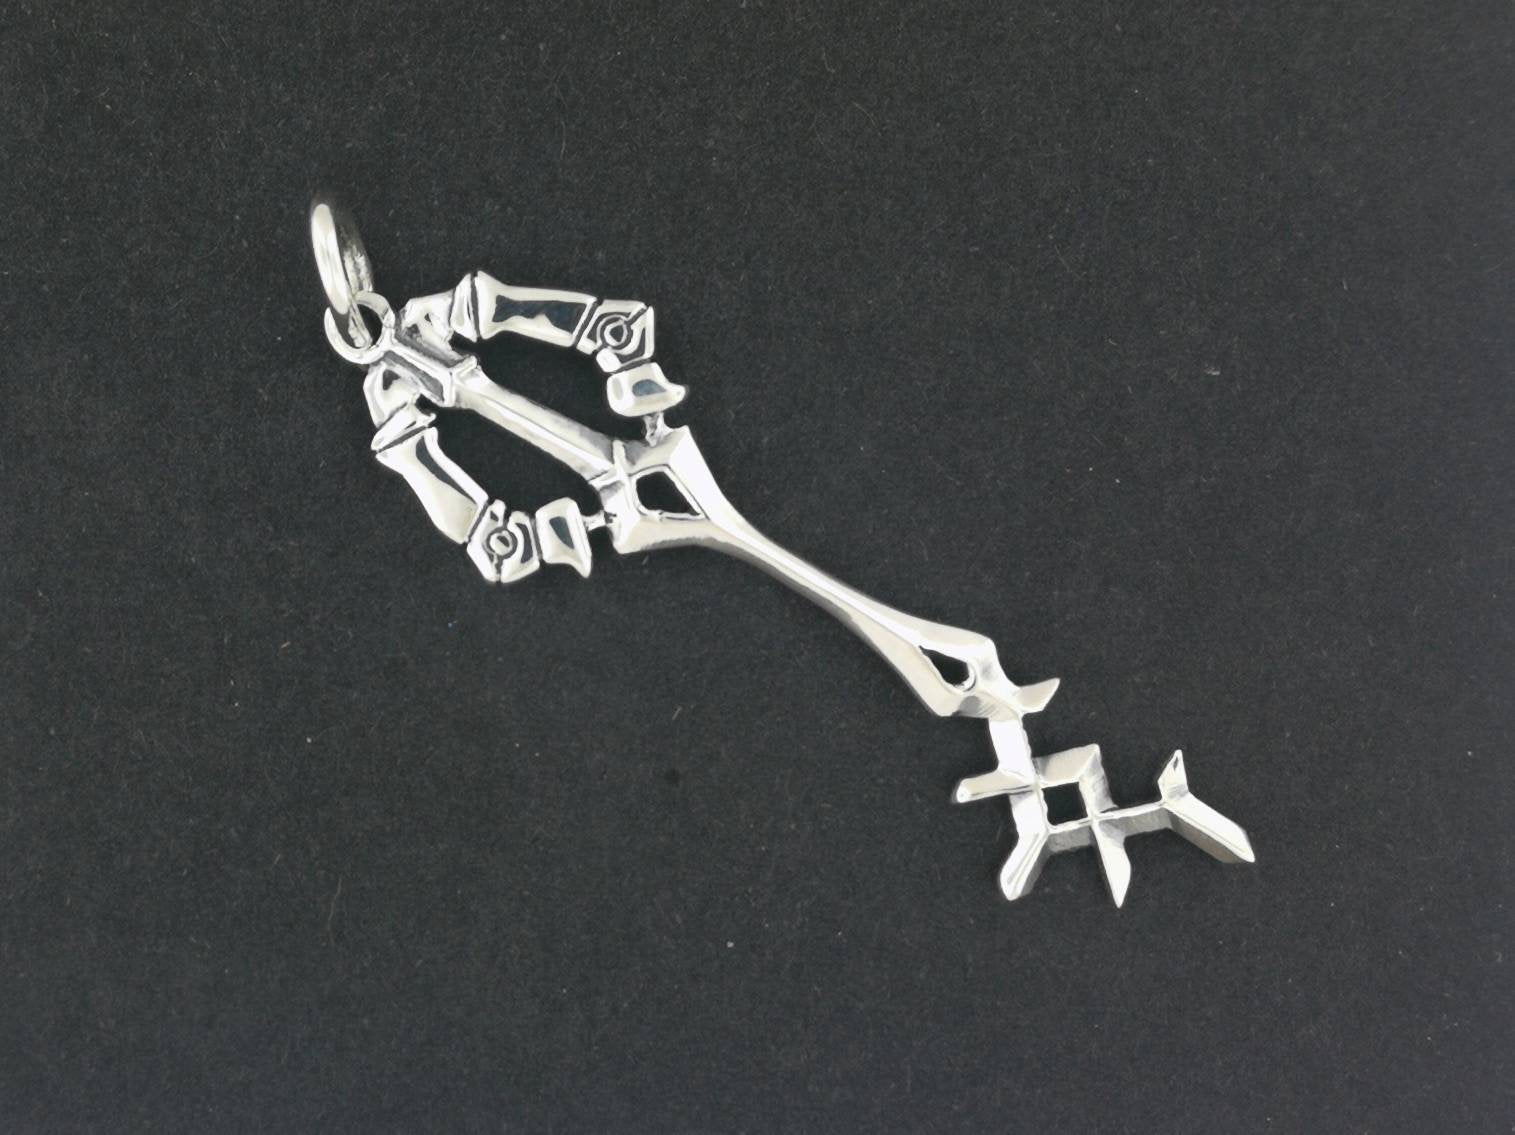 Kingdom Hearts Rainfell Keyblade Pendant in Sterling Silver or Antique Bronze, Sterling Silver Key Pendant, Silver Keyblade Pendant, Silver Key Pendant, KH Keyblade Pendant, Silver KH Pendant, Silver Kingdom Hearts Keyblade, Silver Kingdom Hearts Keyblade Pendant, Kingdom Hearts Jewelry, Kindom Hearts Jewellery, Gamer Geek Jewelry, Gamer Geek Jewellery, Silver Gamer Pendant, Silver Rainfell Keyblade Pendant, KH Birth By Sleep Pendant, Video Game Jewelry, Video Game Jewellery, Video Game Pendant